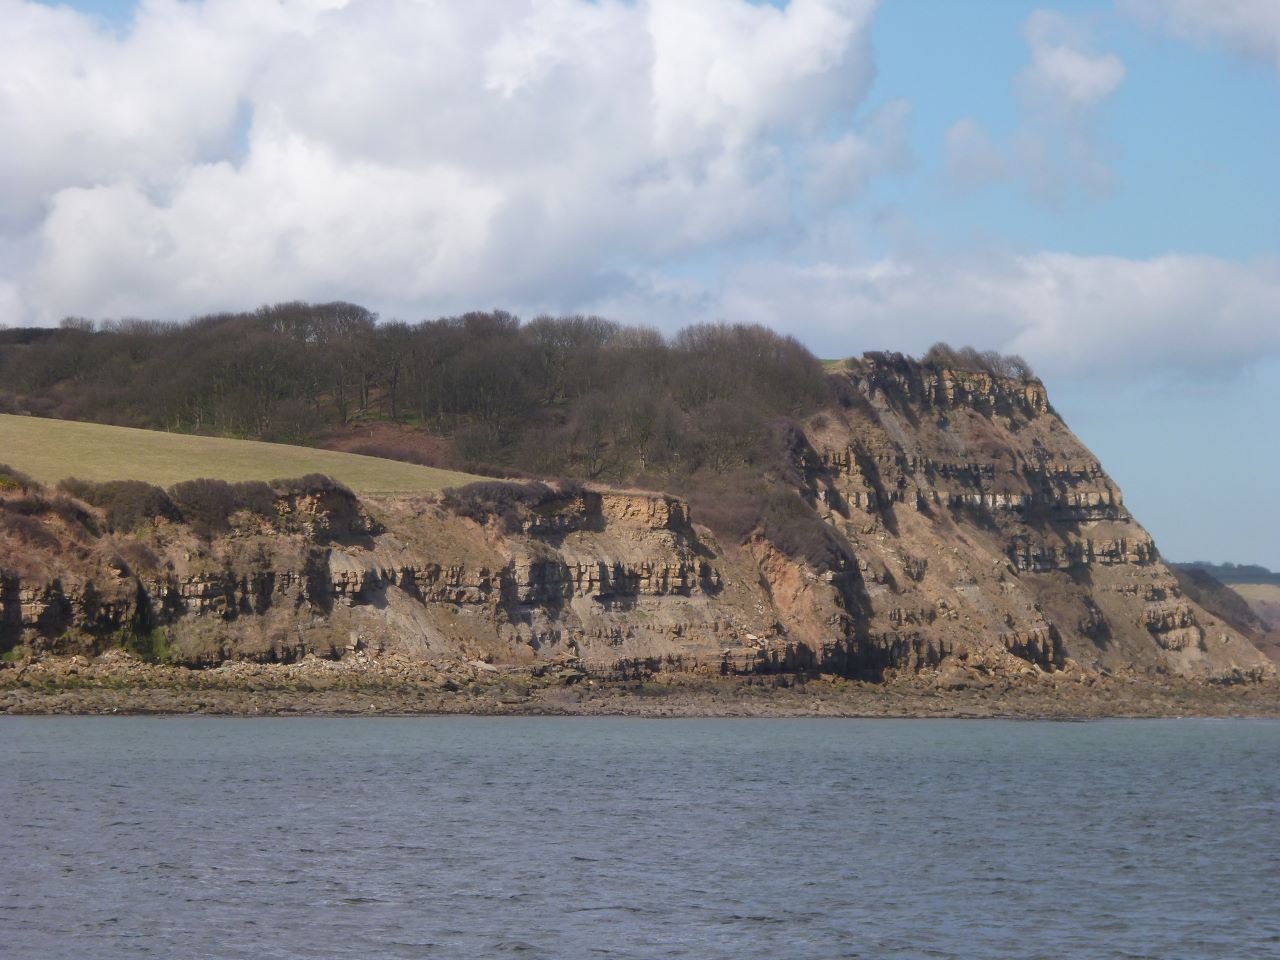 View of The Middle Jurassic sequence north of Cloughton Wyke taken from Hundale Point.  Photograph: Steve Livera